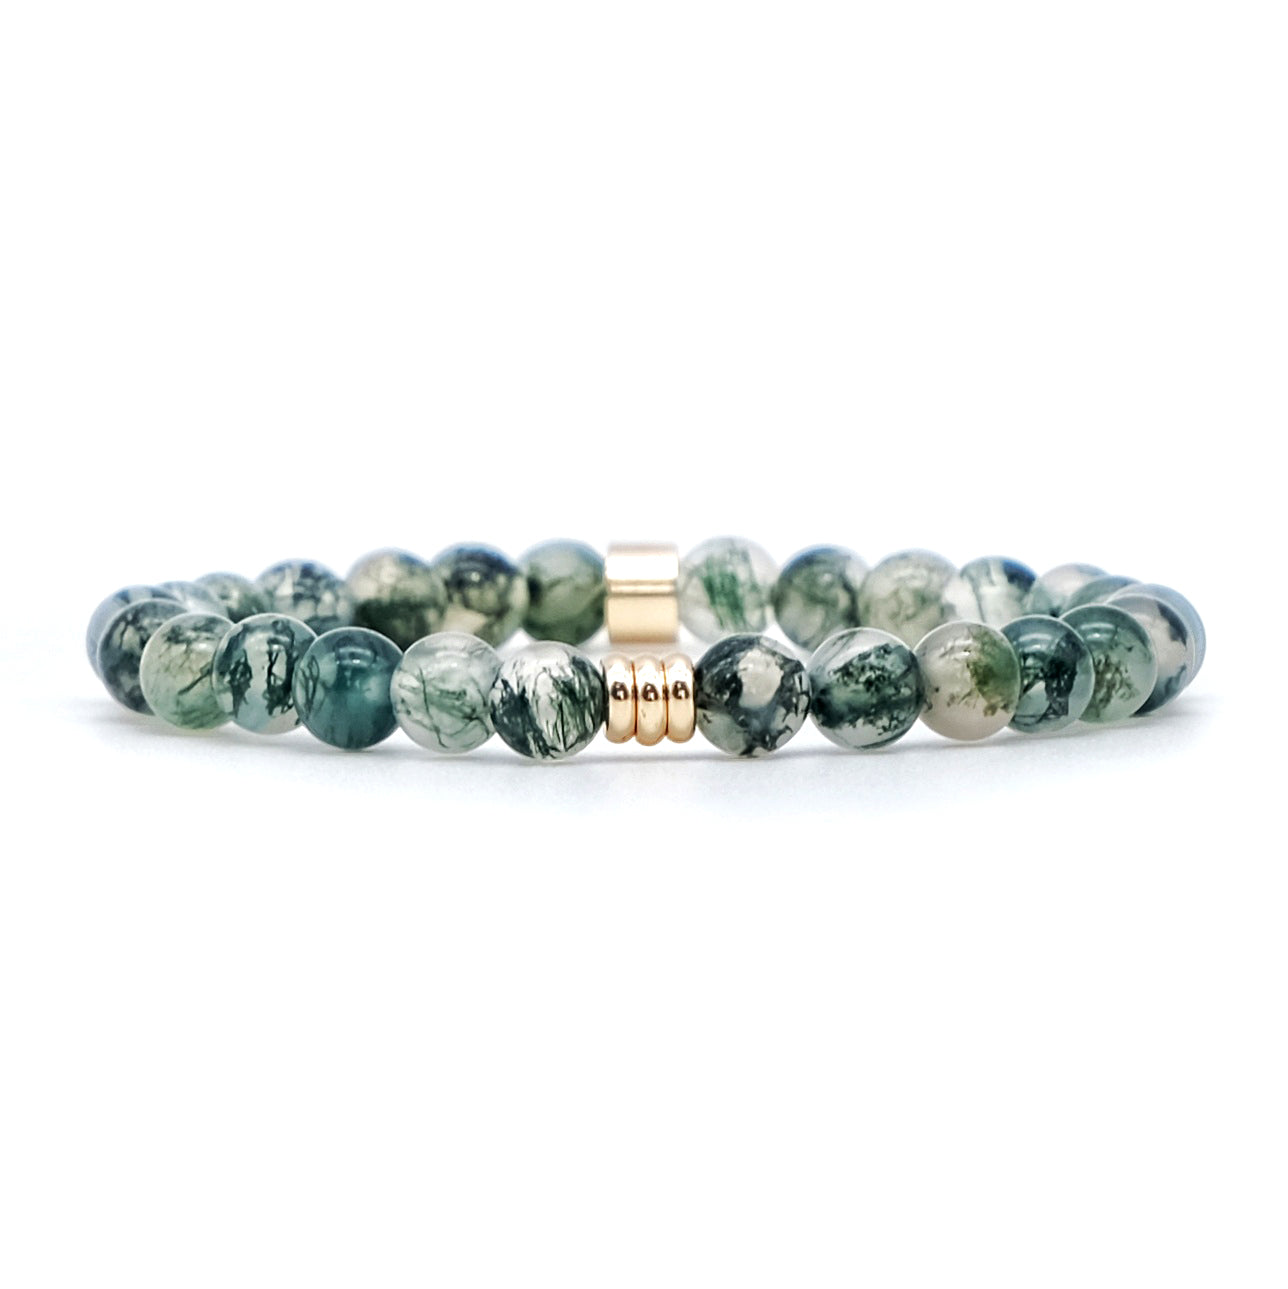 Moss agate gemstone bracelet in 6mm beads with gold accessories